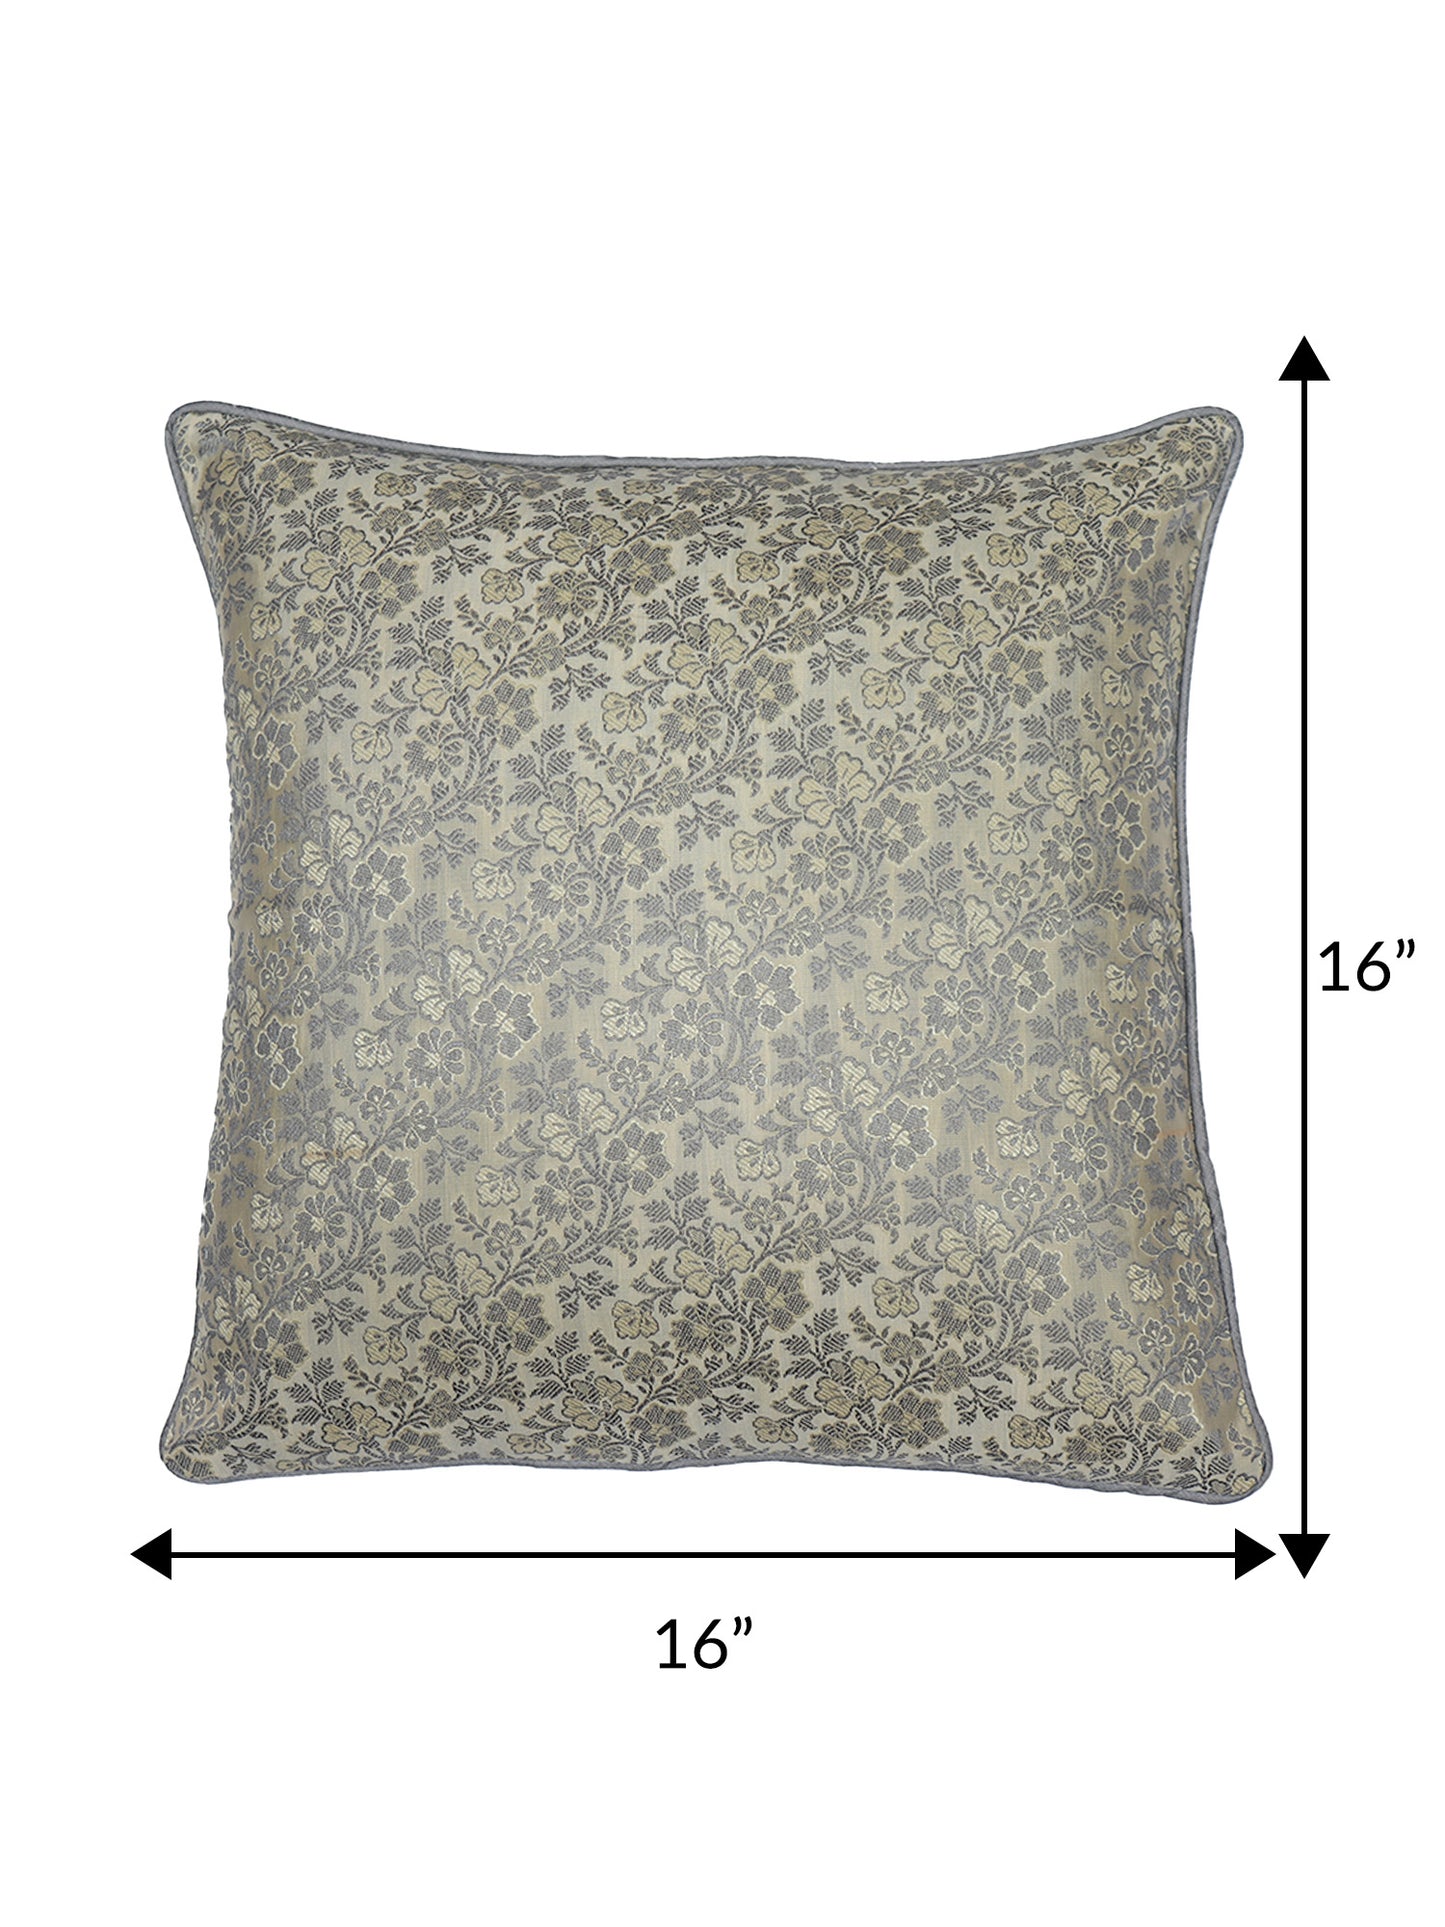 ZEBA World Square Cushion Cover for Sofa, Bed | Banarasi Brocade Silk - Floral Weave with Cord Piping| Grey - 16x16in(40x40cm) (Pack of 1)